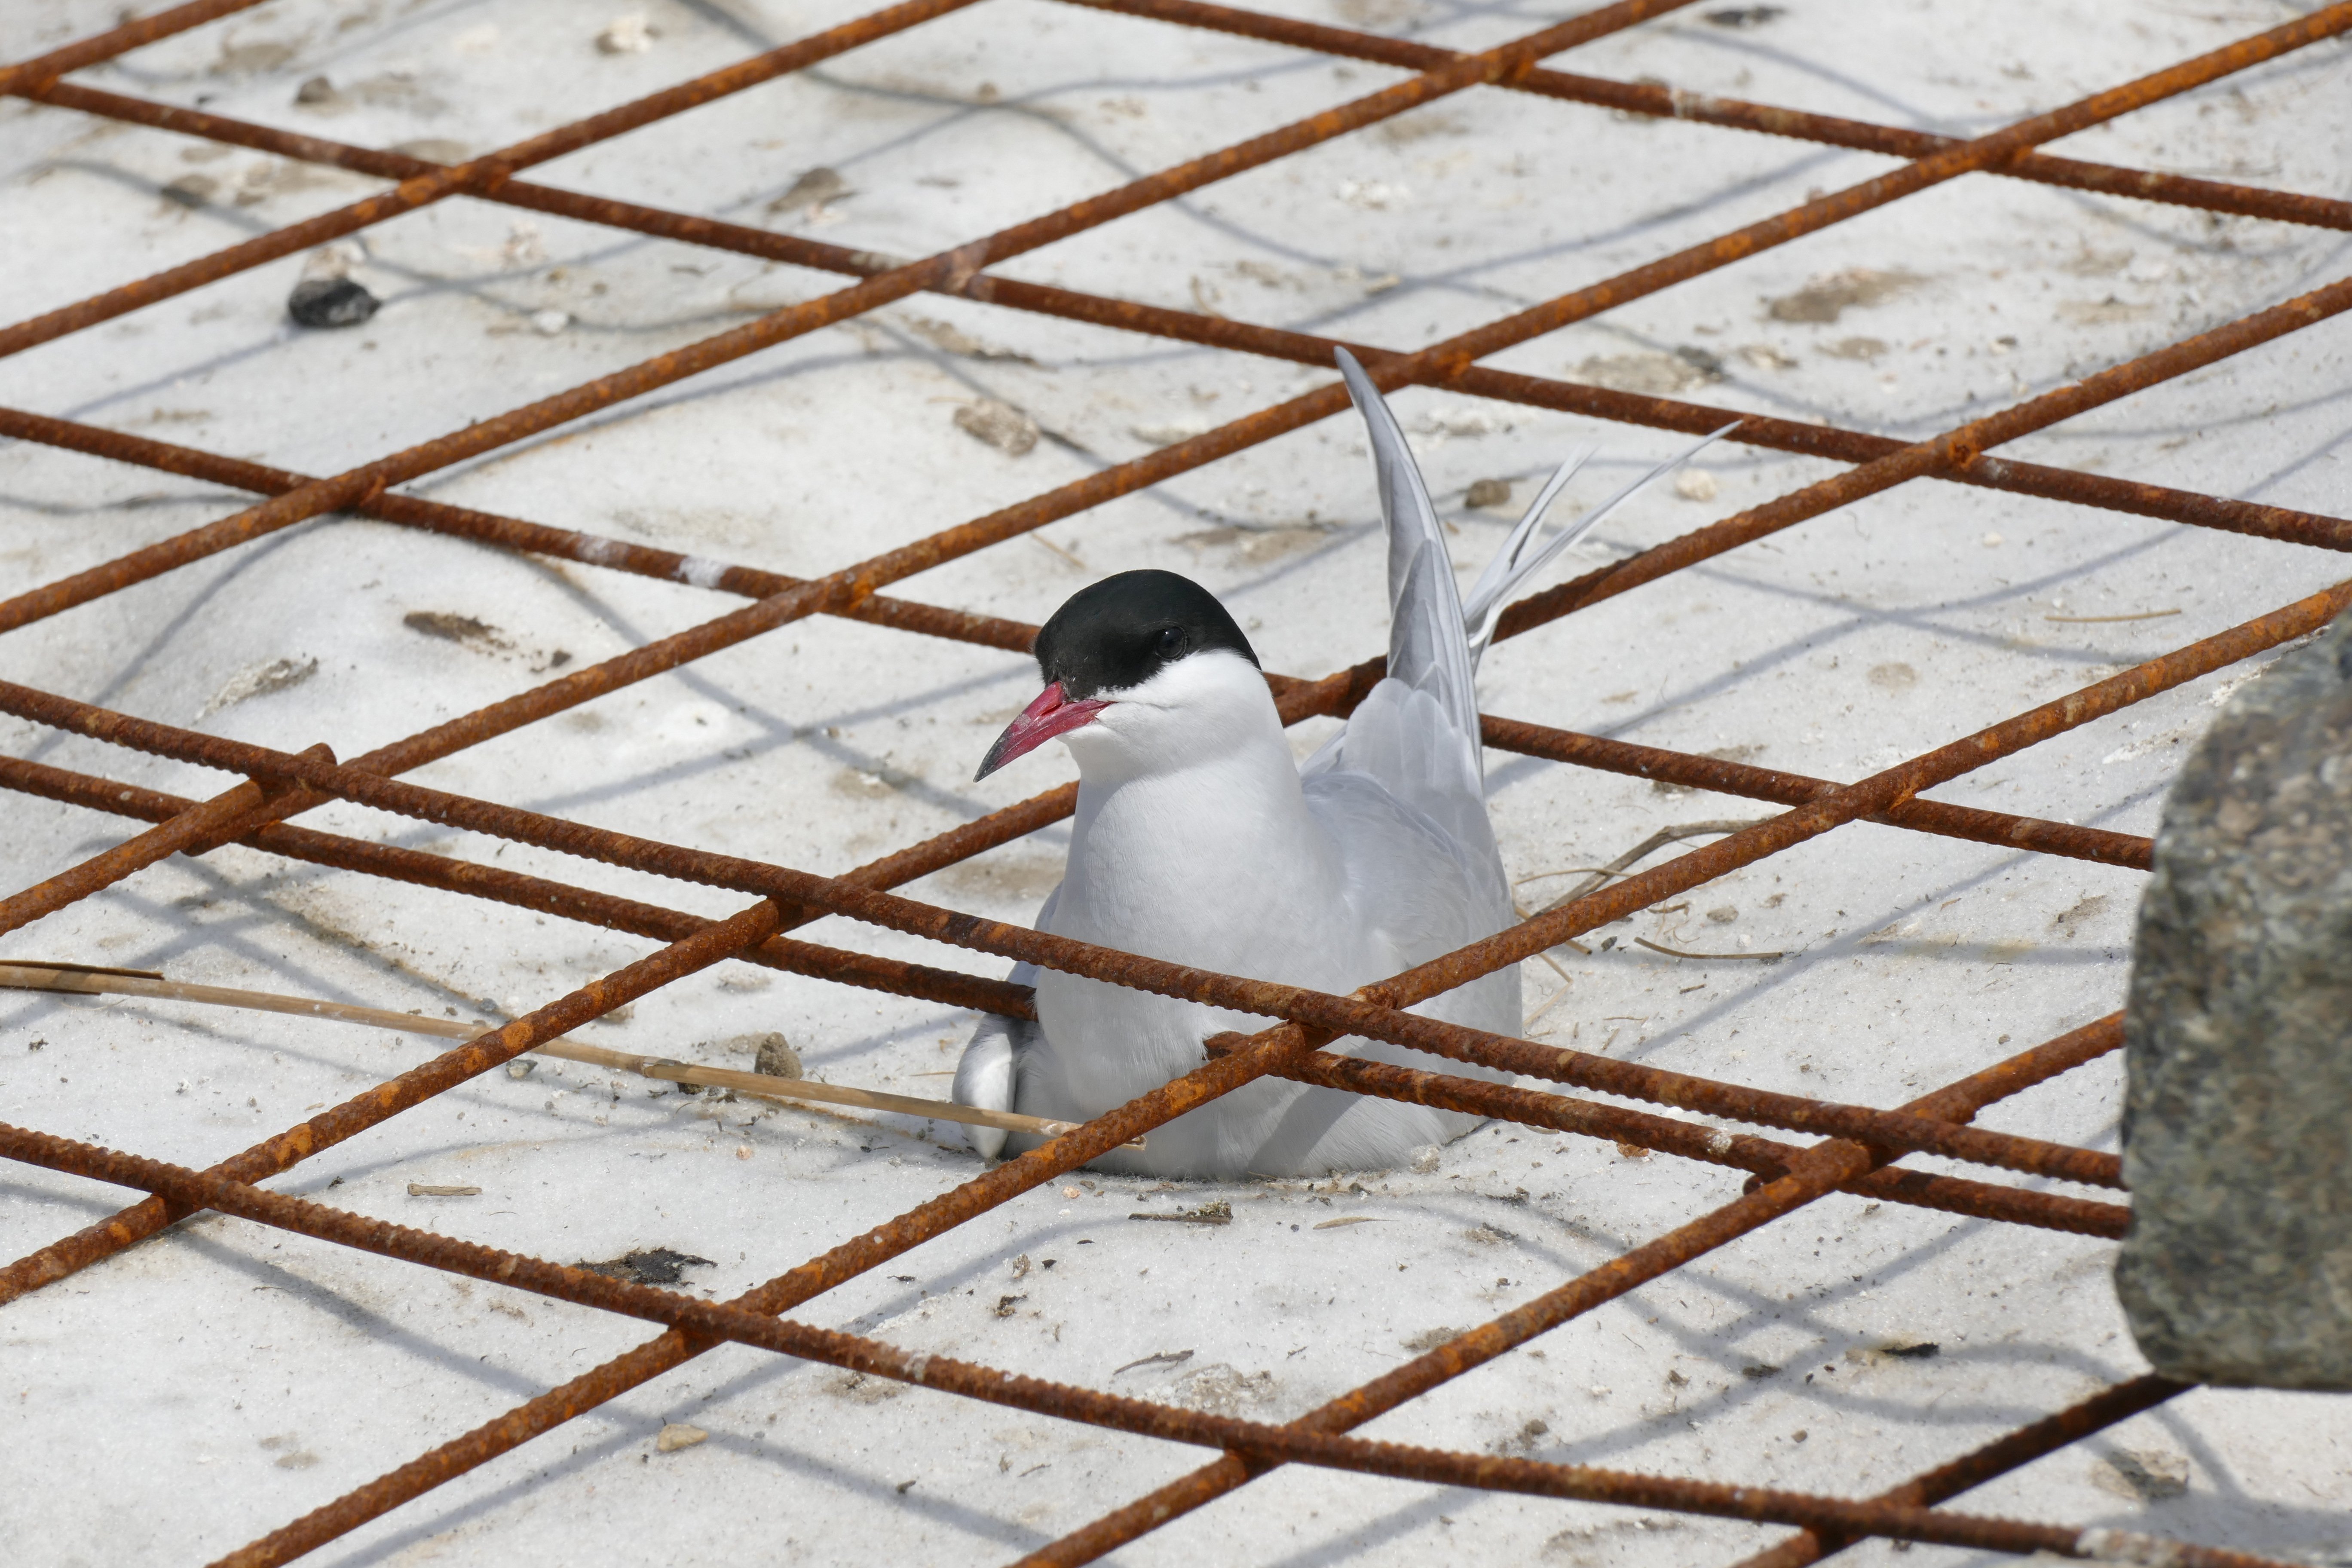 Common tern sitting on its clutch of eggs at a construction site.